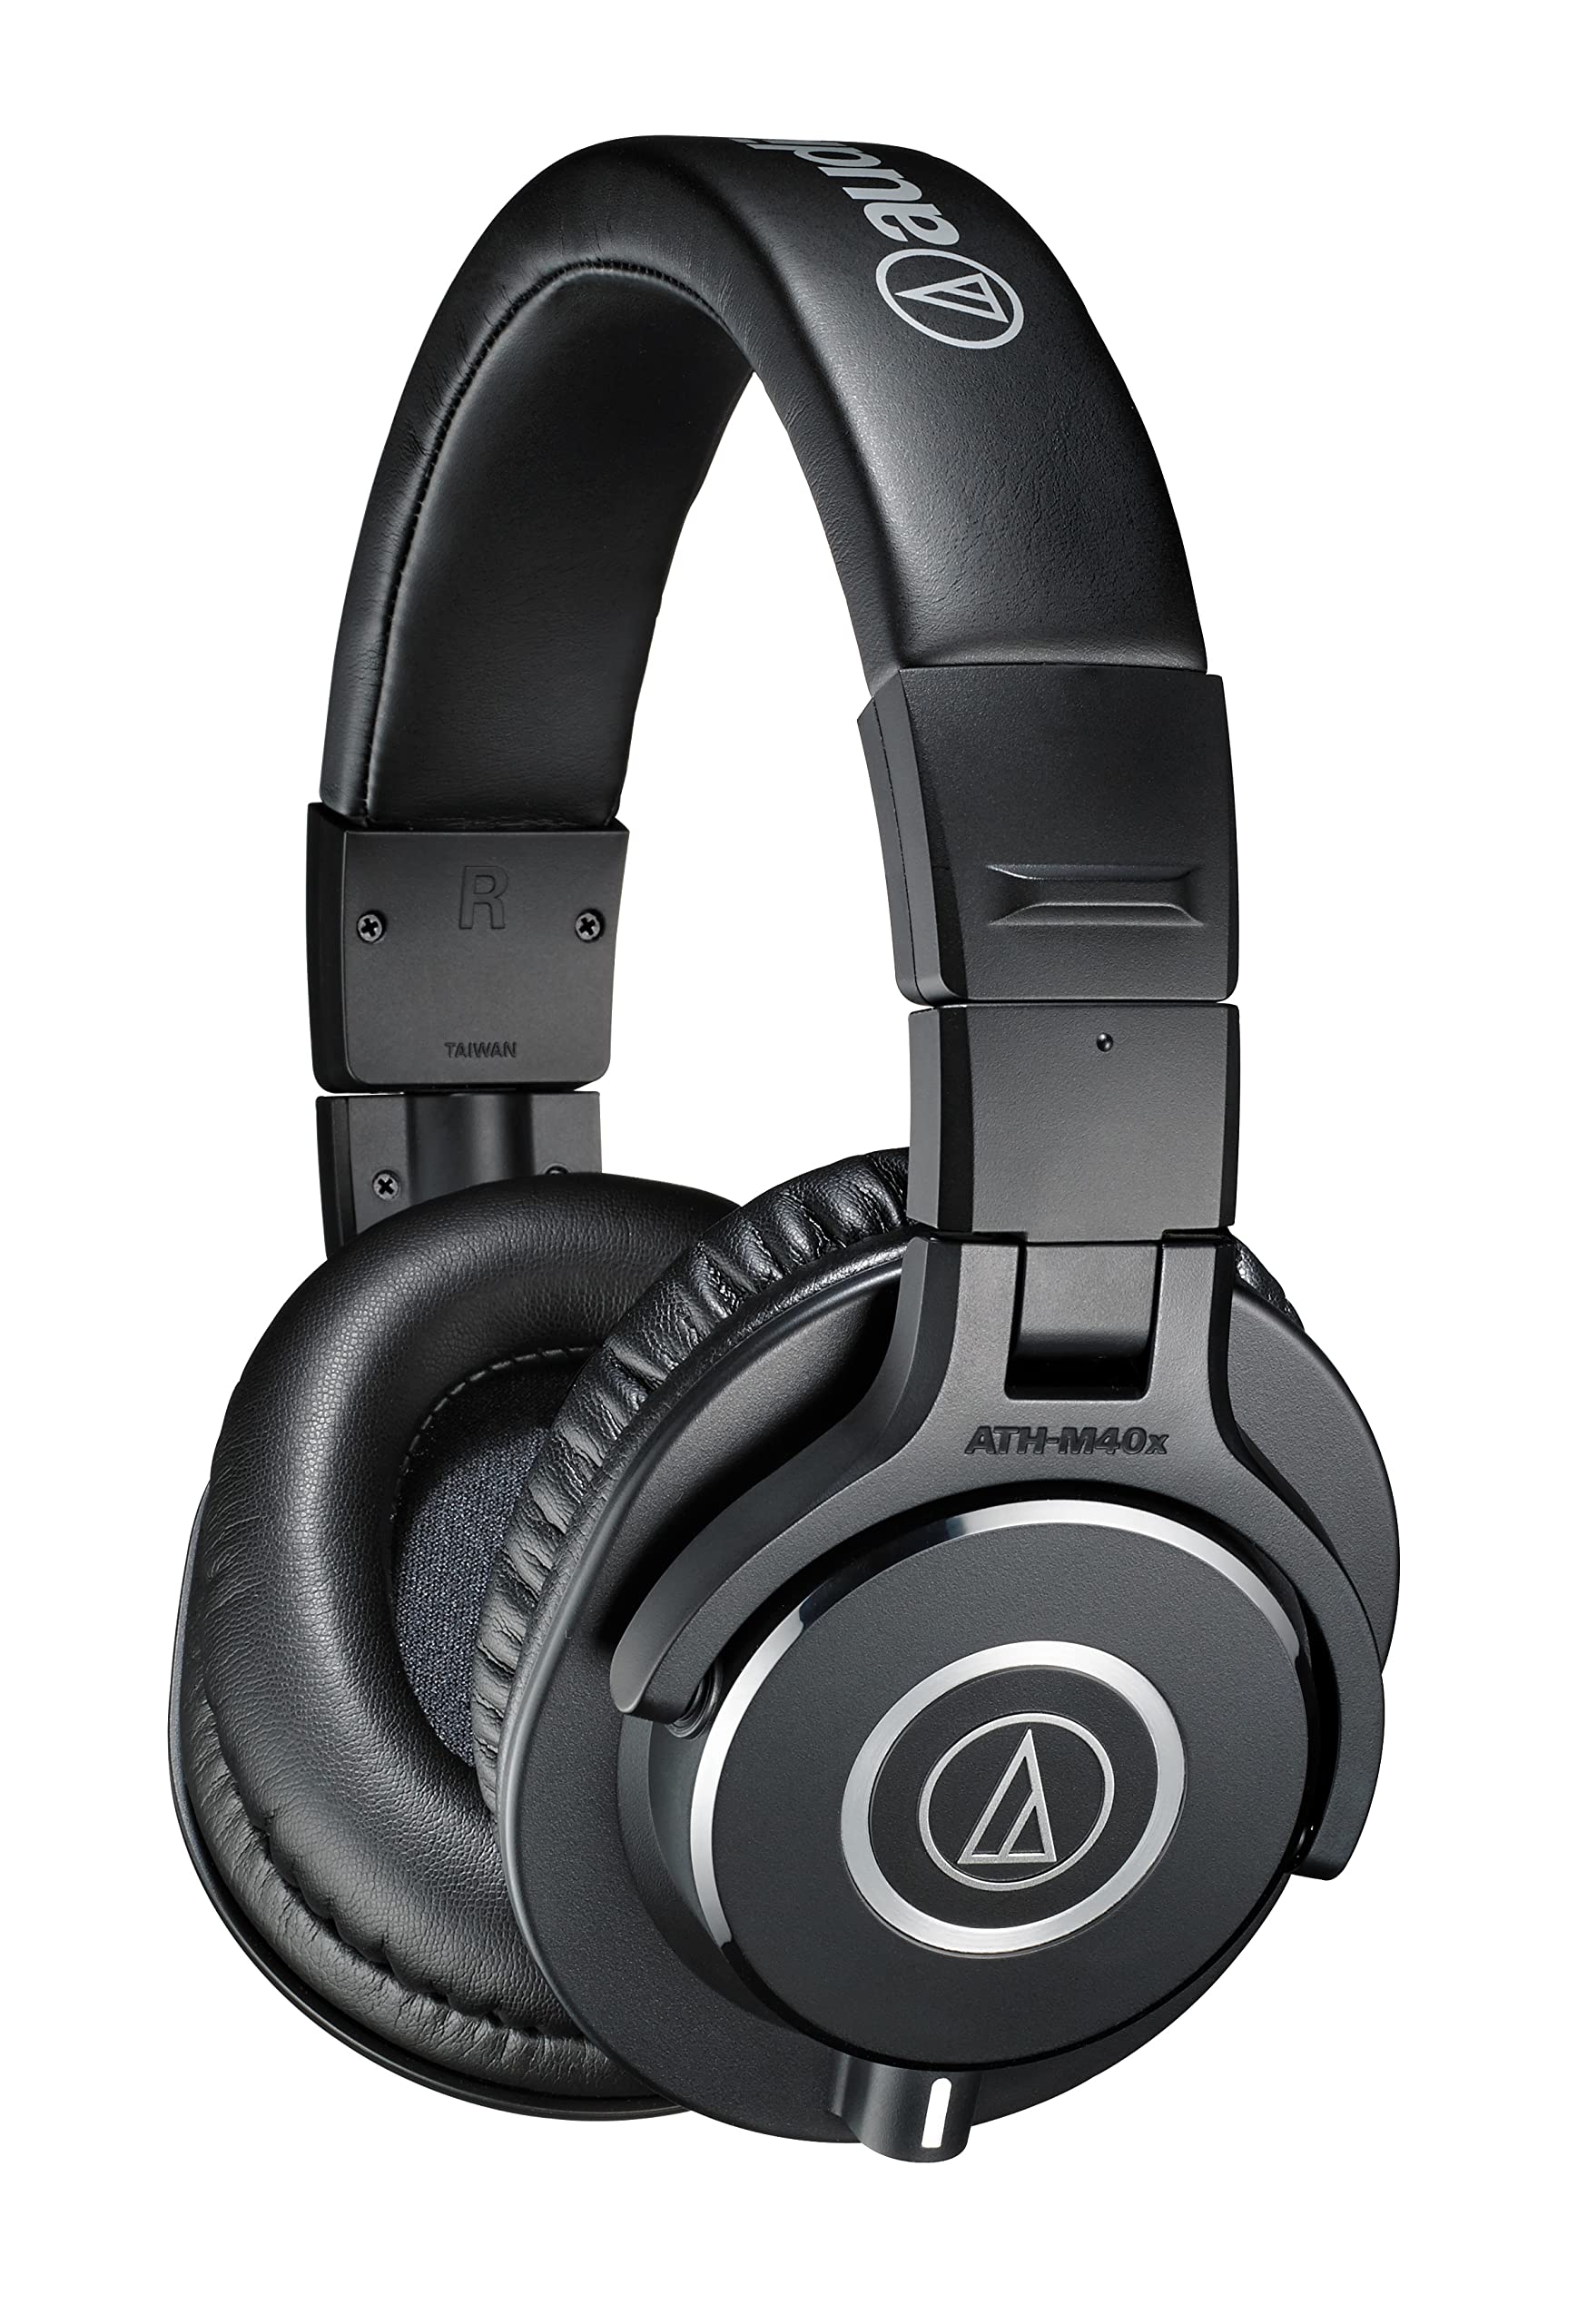 Audio-Technica ATH-M40x Professional Studio Monitor Headphone, Black, with Cutting Edge Engineering, 90 Degree Swiveling Earcups, Pro-grade Earpads/Headband, Detachable Cables Included